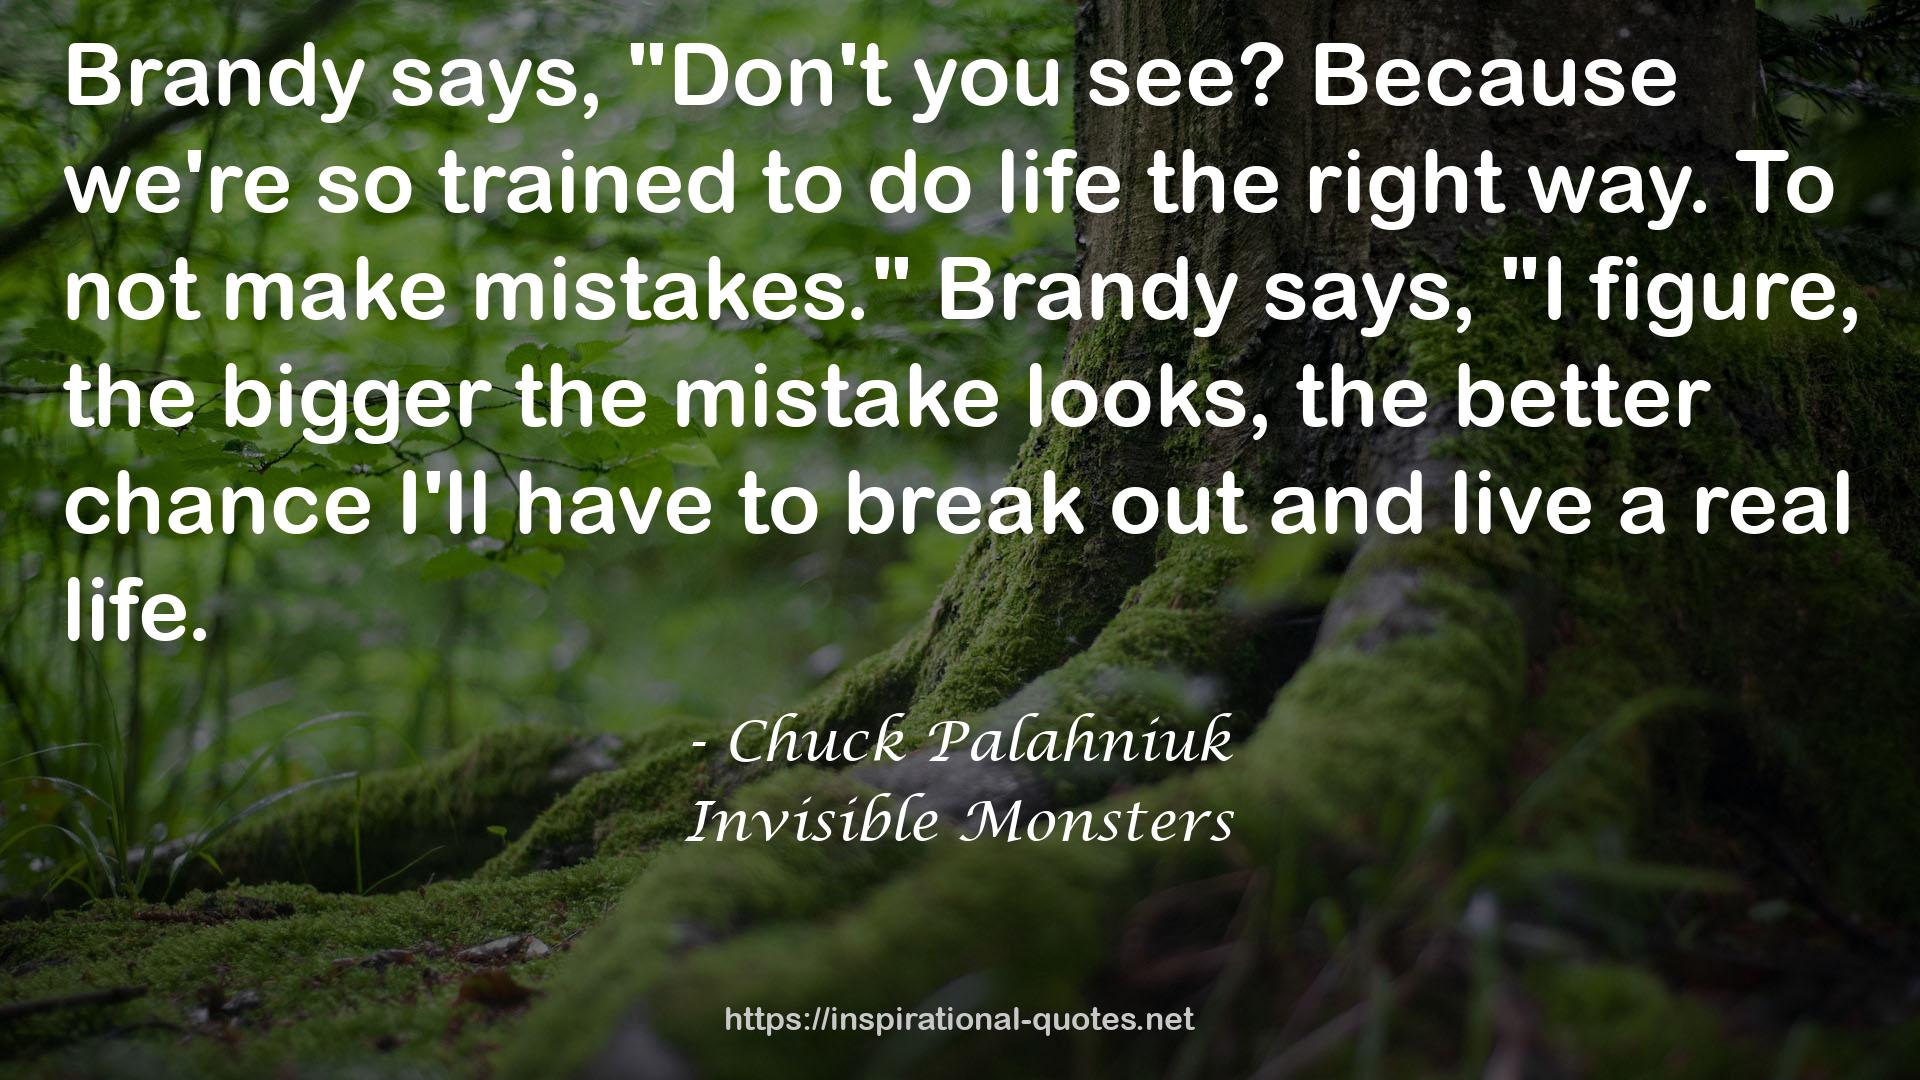 Invisible Monsters QUOTES